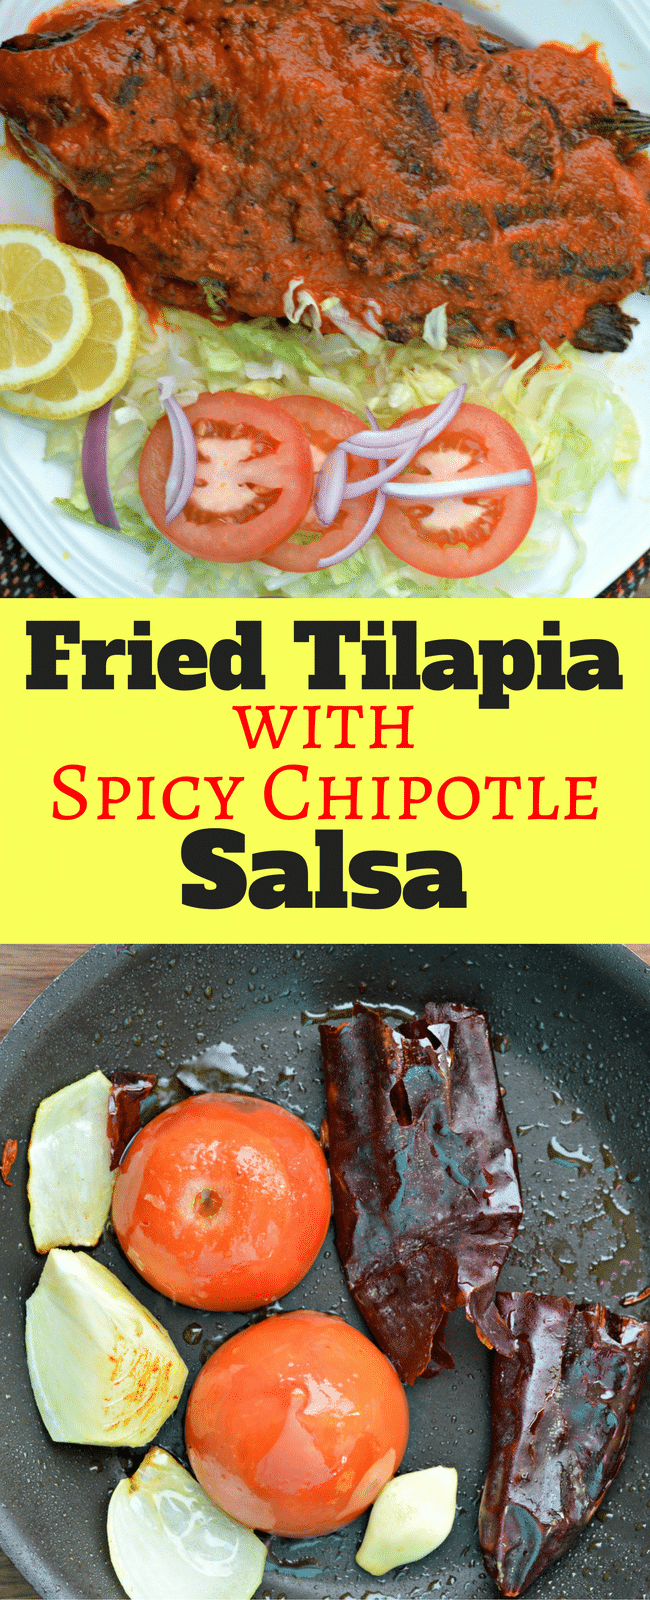 Fried Tilapia with Spicy Chipotle Salsa - My Latina Table